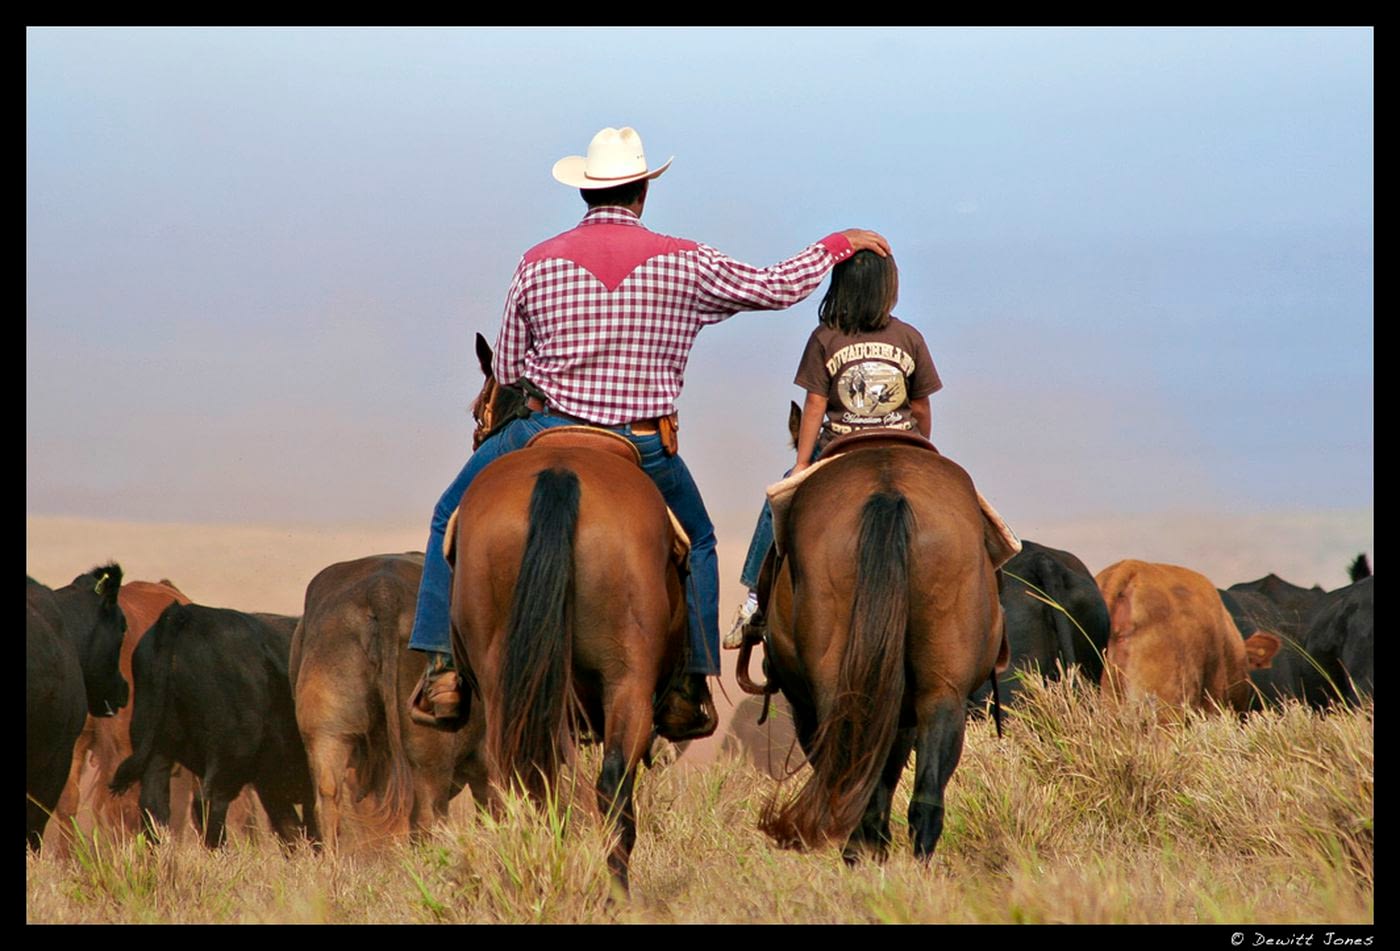 Image: Cowboy puts his hand on a child's head as they ride horses next to each other